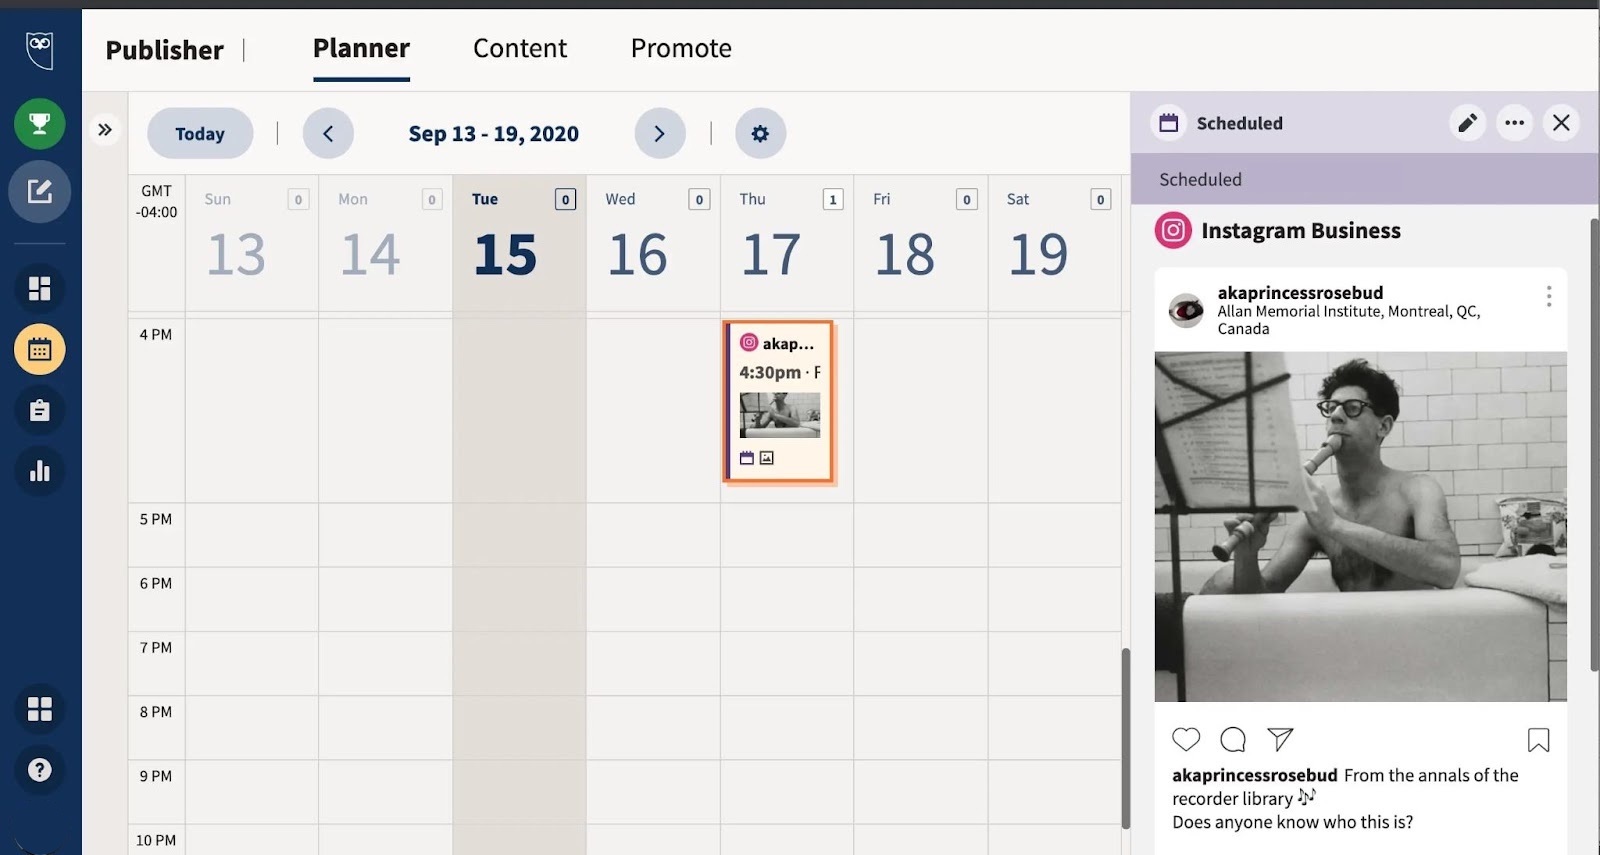 "Hootsuite" dashboard showing an icon of a scheduled post on the calendar along with a preview of how it appears.